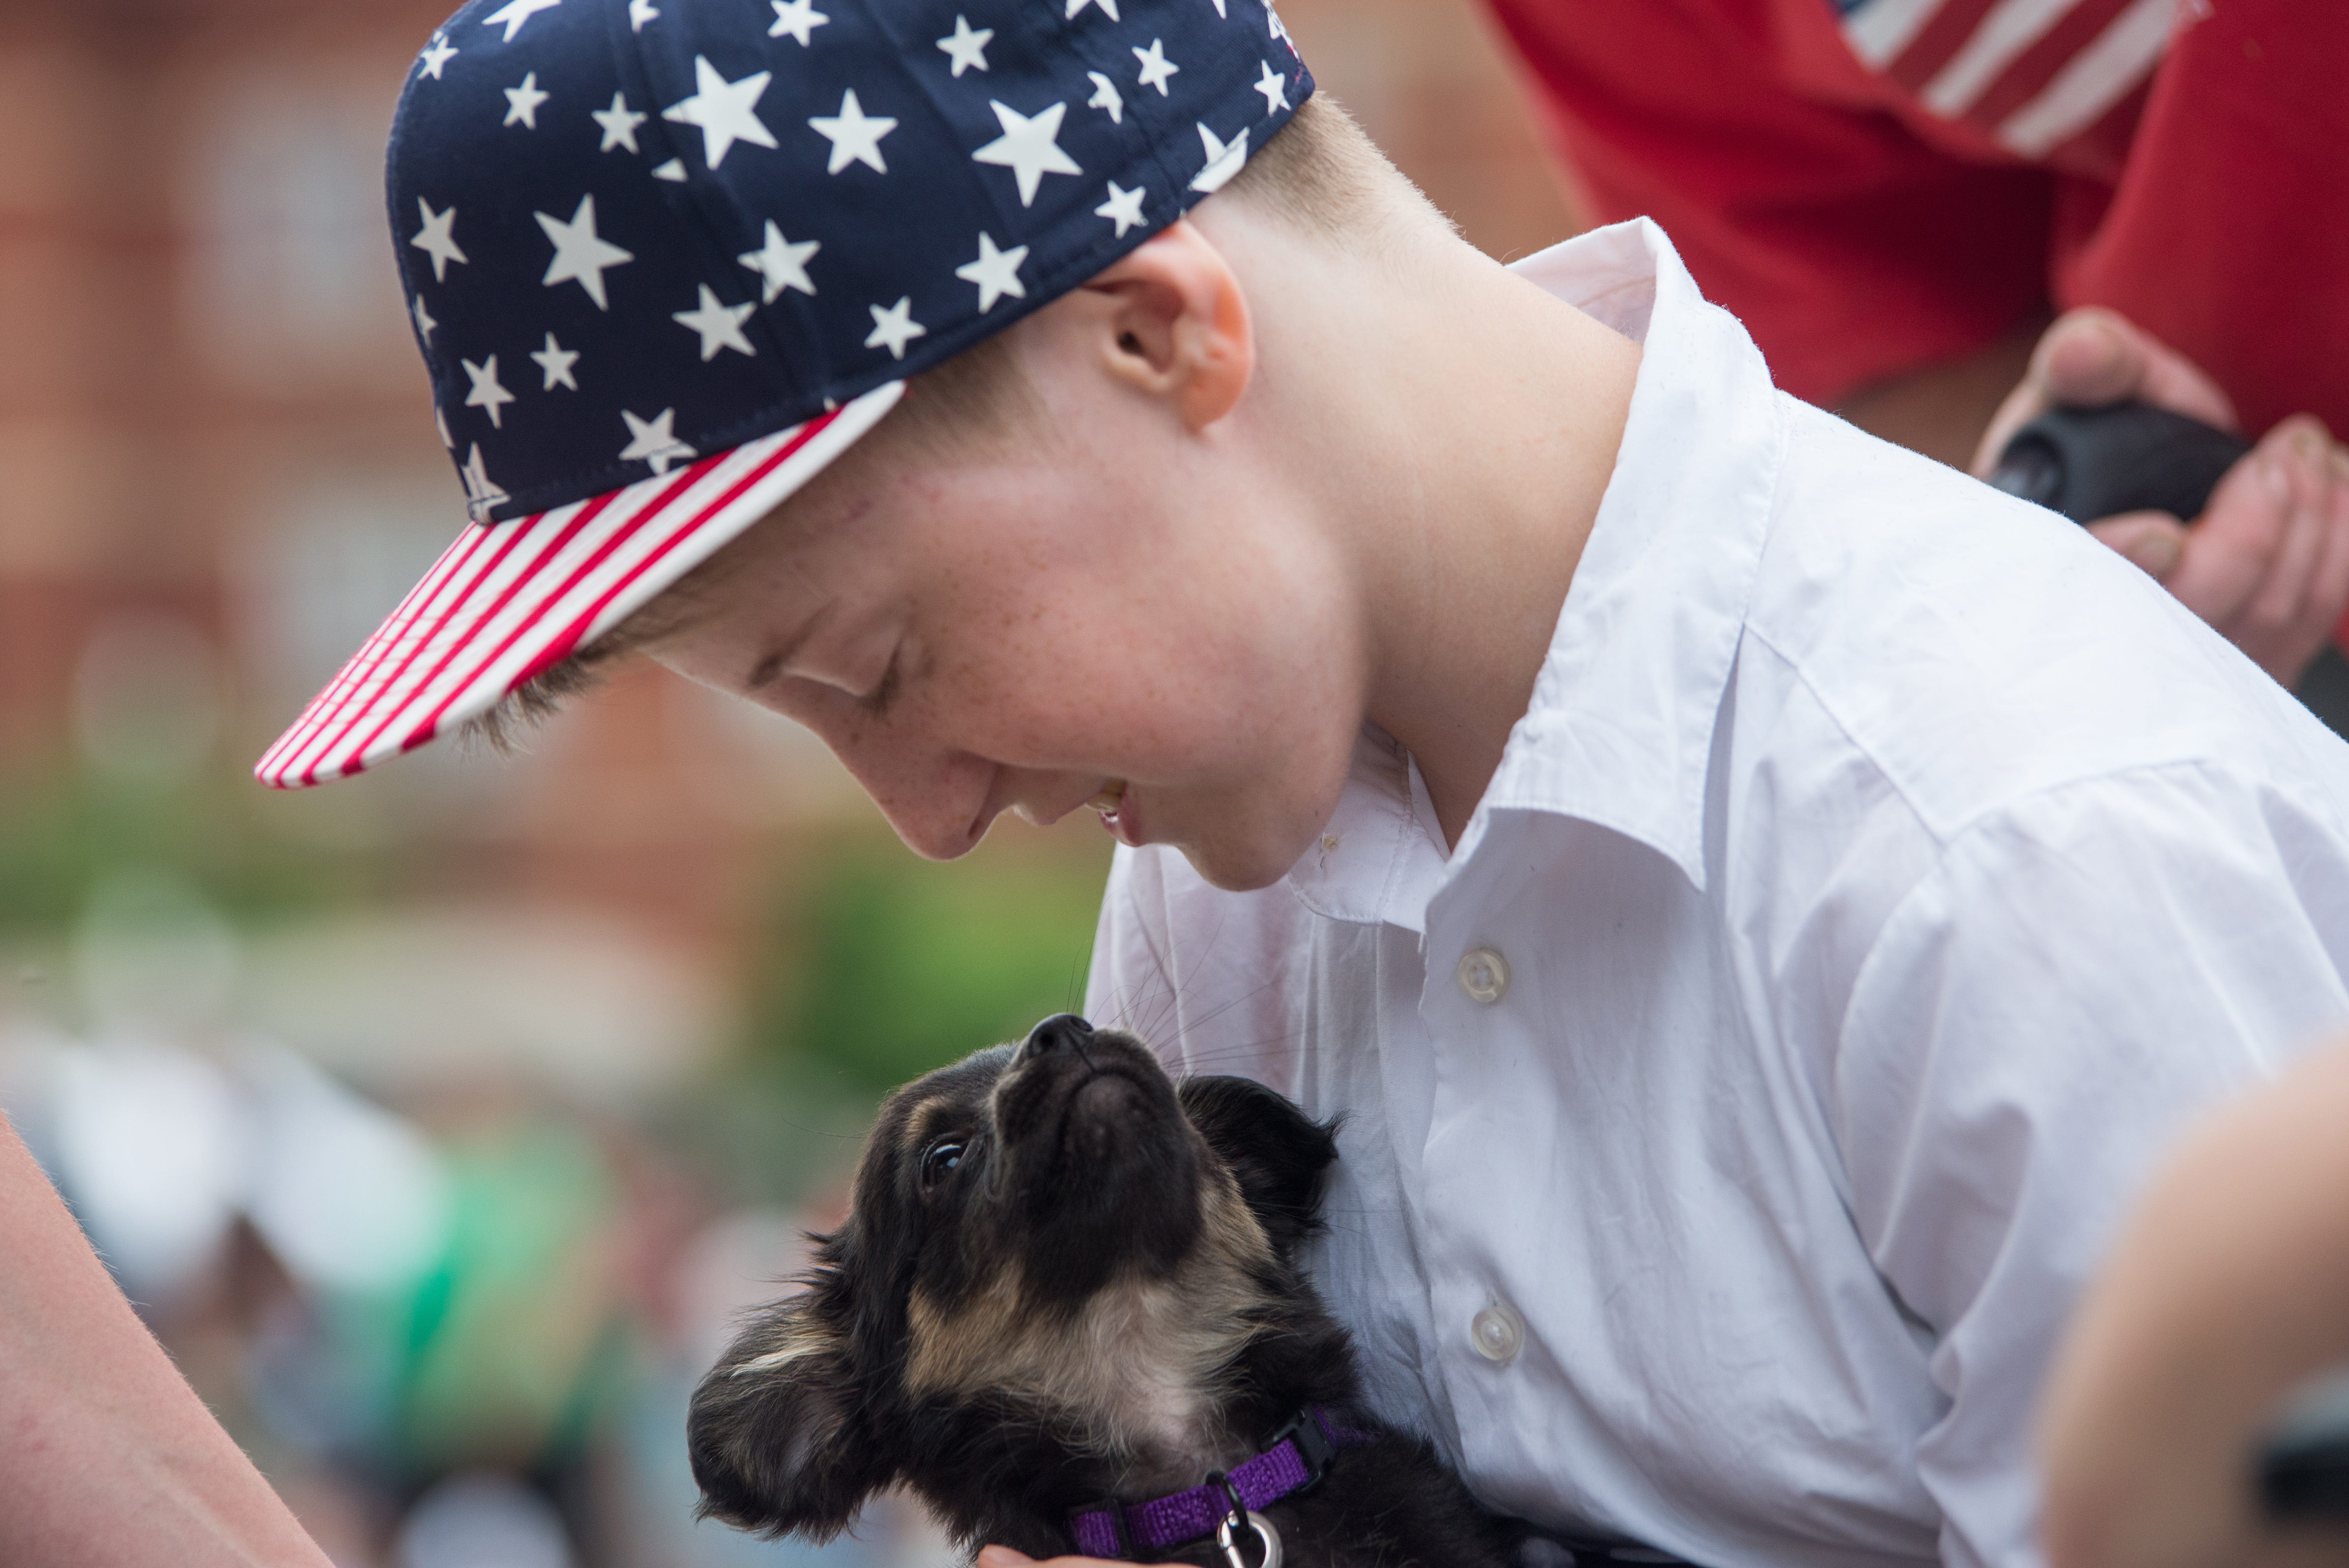 Veterinarian urges dog lovers: Celebrate July 4 without fireworks | Opinion